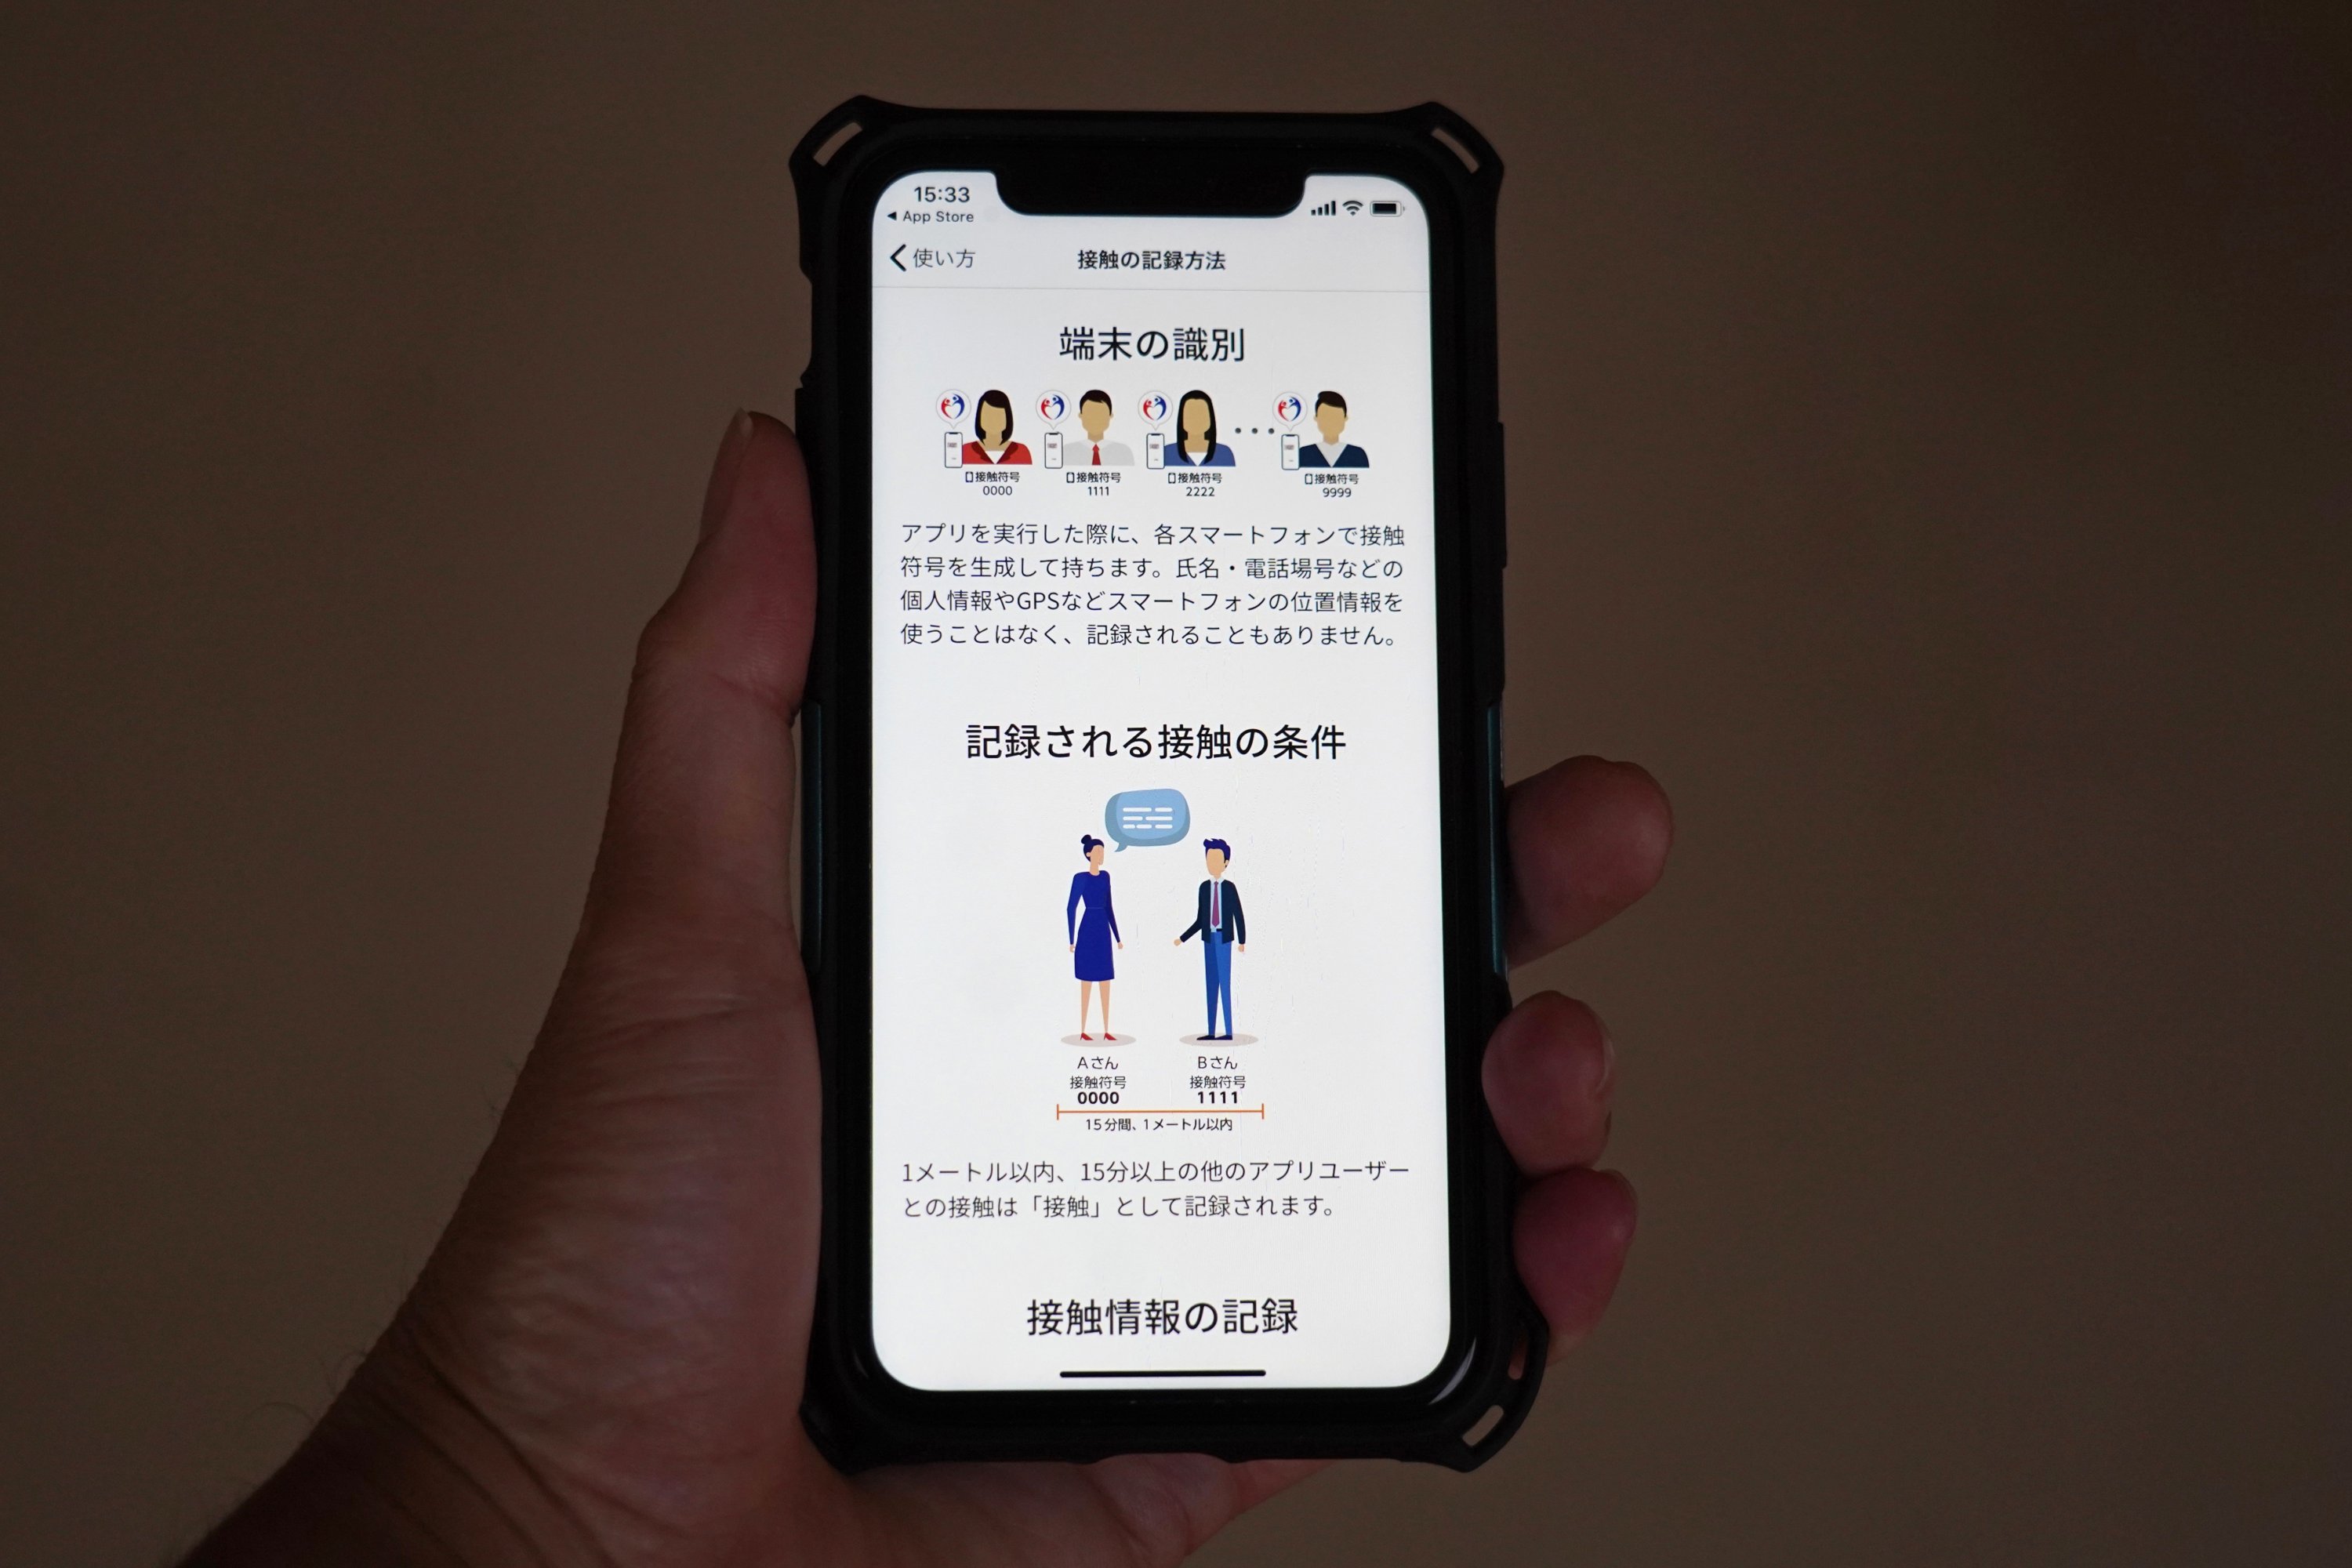 The smartphone screen, seen in Yokohama, Japan, shows a trial version of the COVID-19 Contact Confirming Application, or COCOA, released Friday, June 19, 2020, by the country